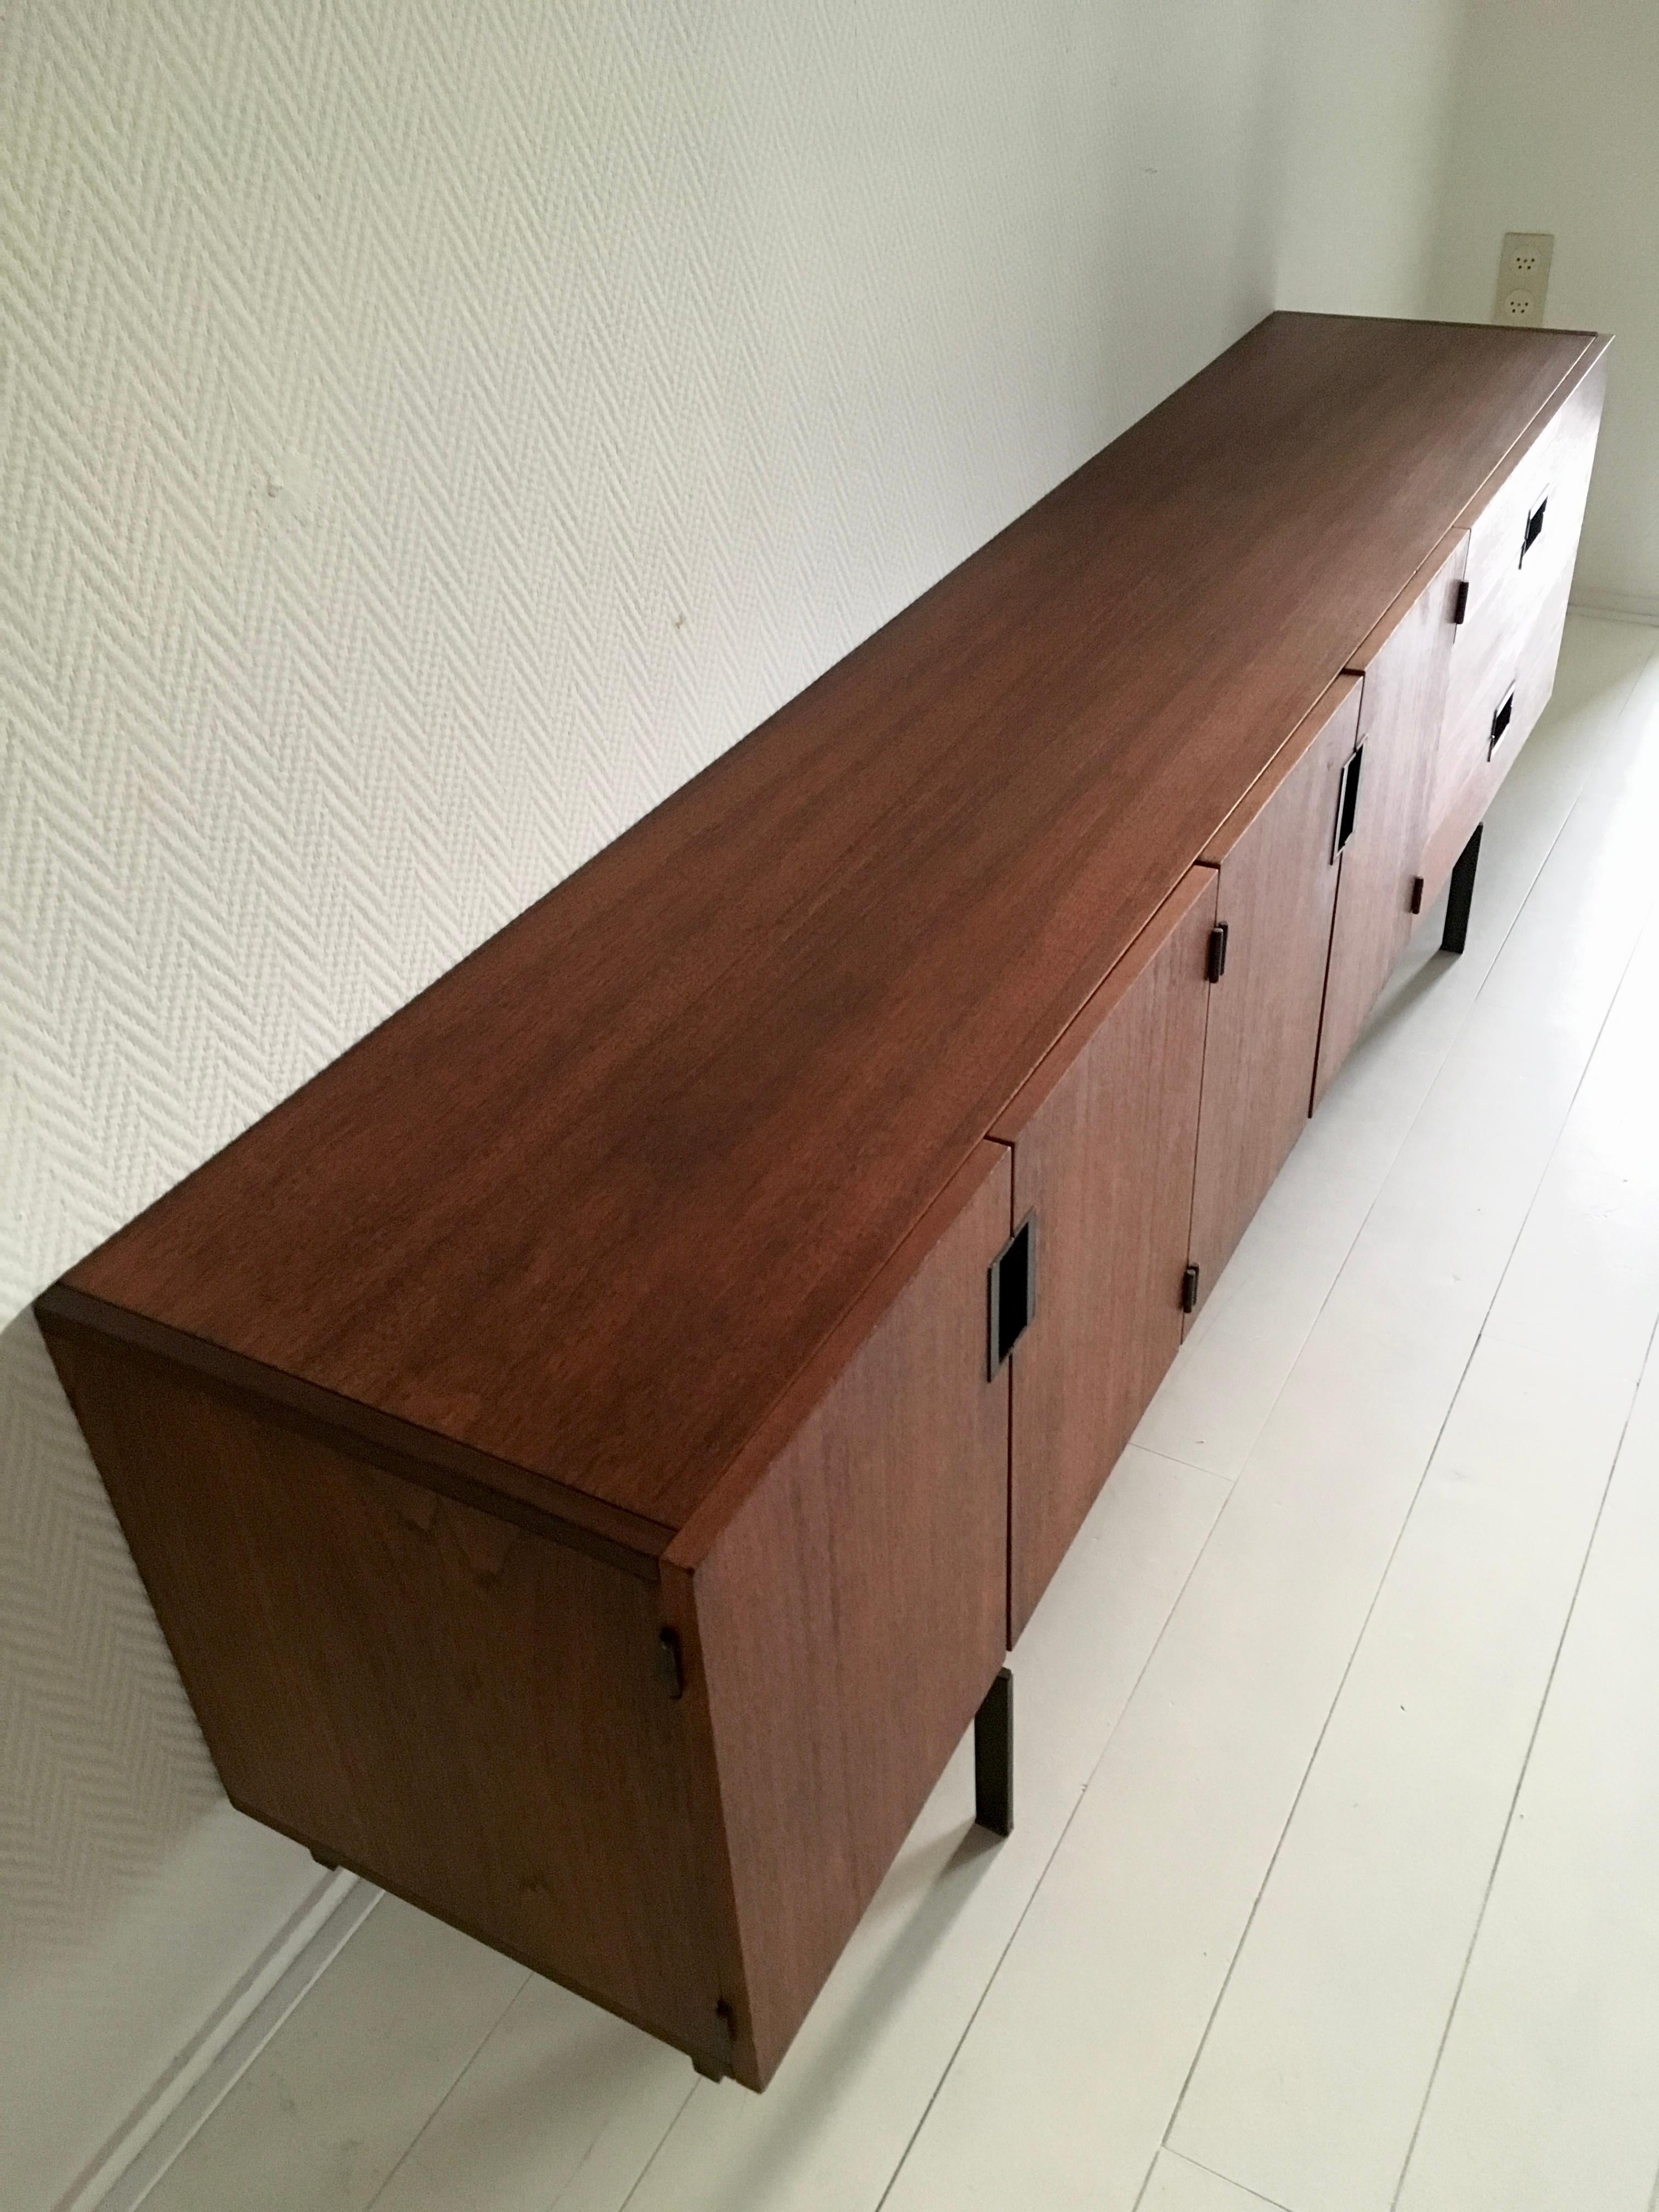 Iconic Pastoe Credenza, Sideboard, Japanese Series, Model DU03 by Cees Braakman In Good Condition For Sale In Schagen, NL